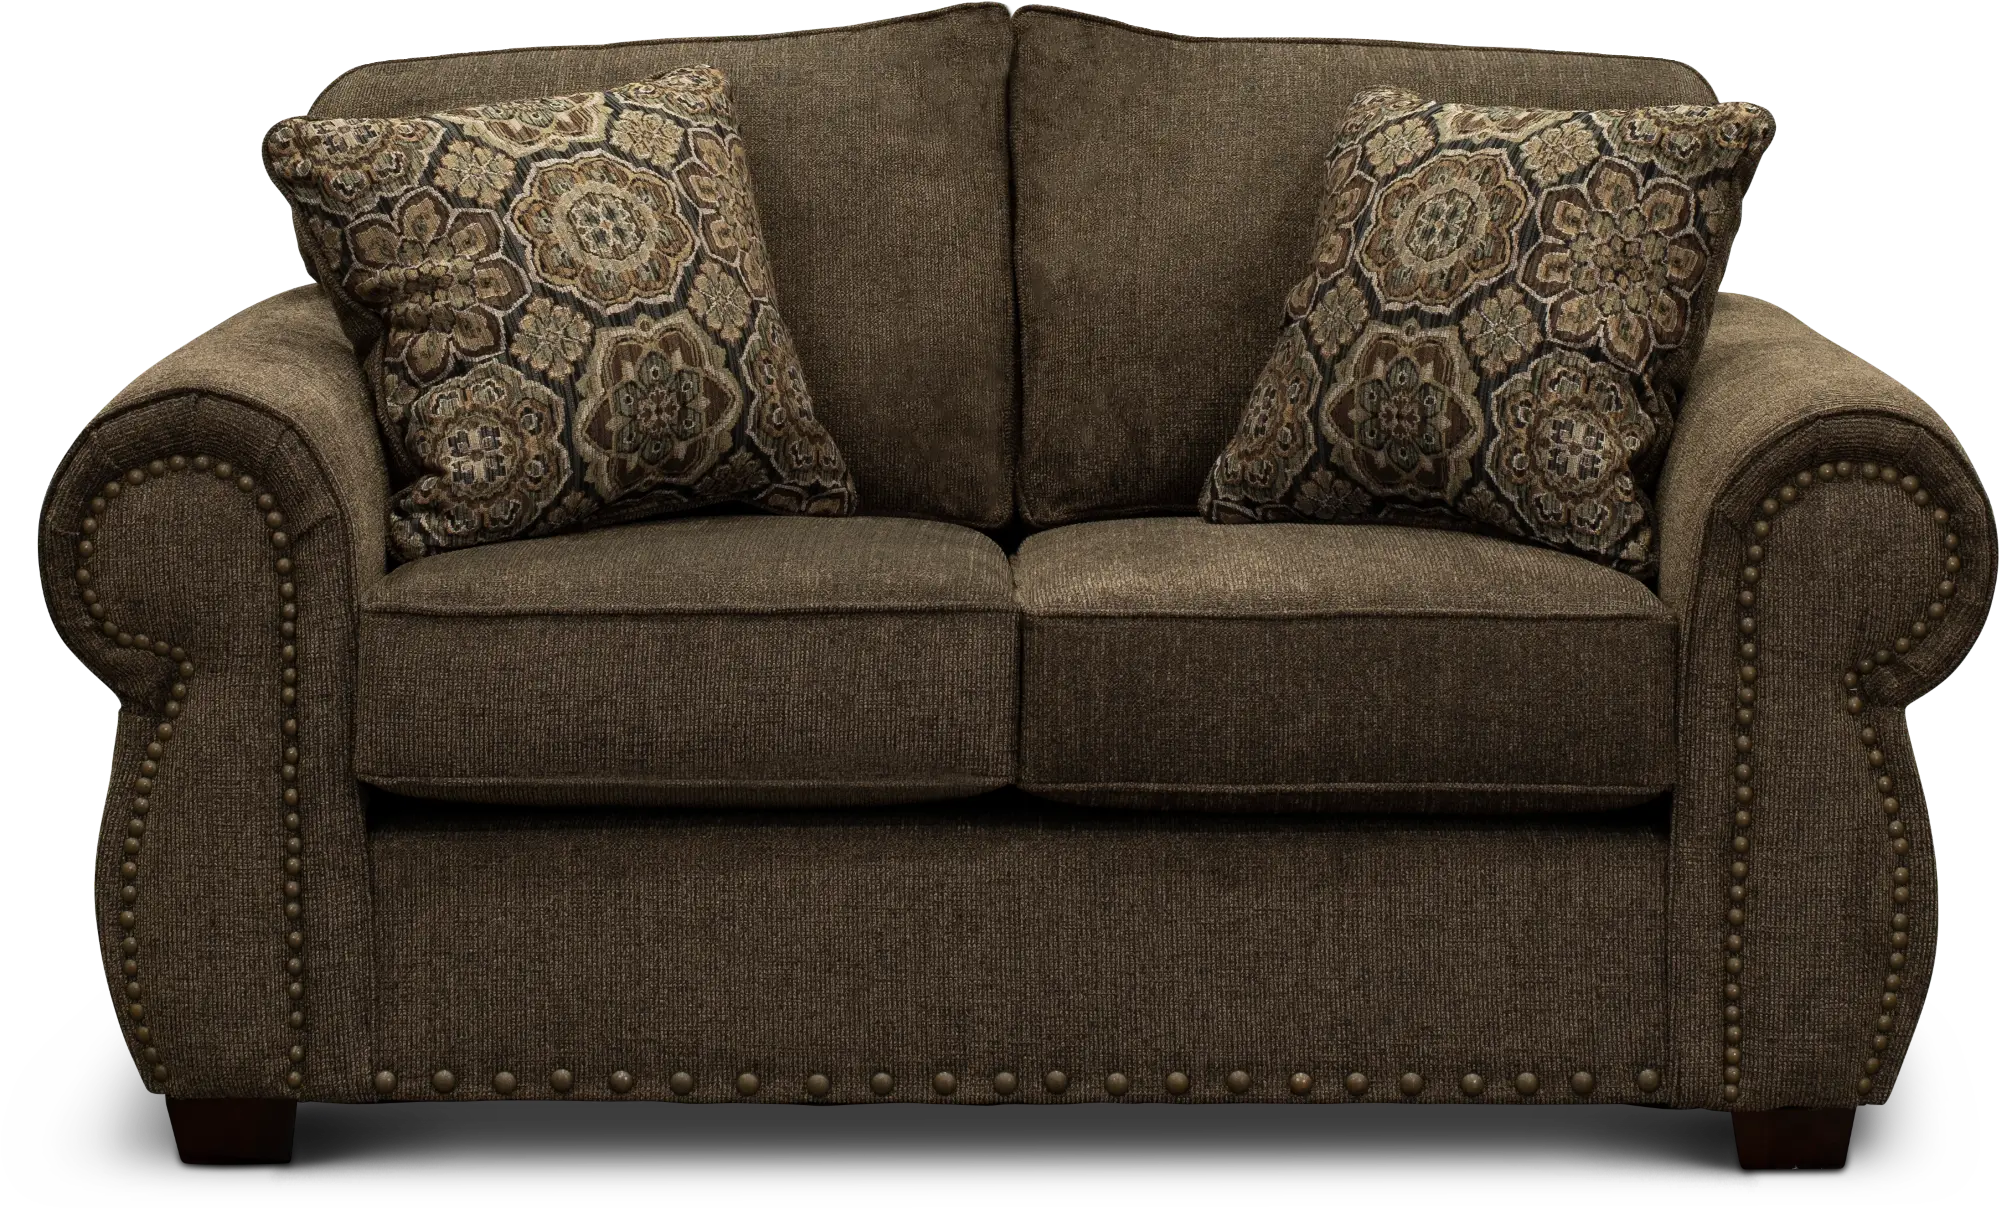 Southport Brown Loveseat